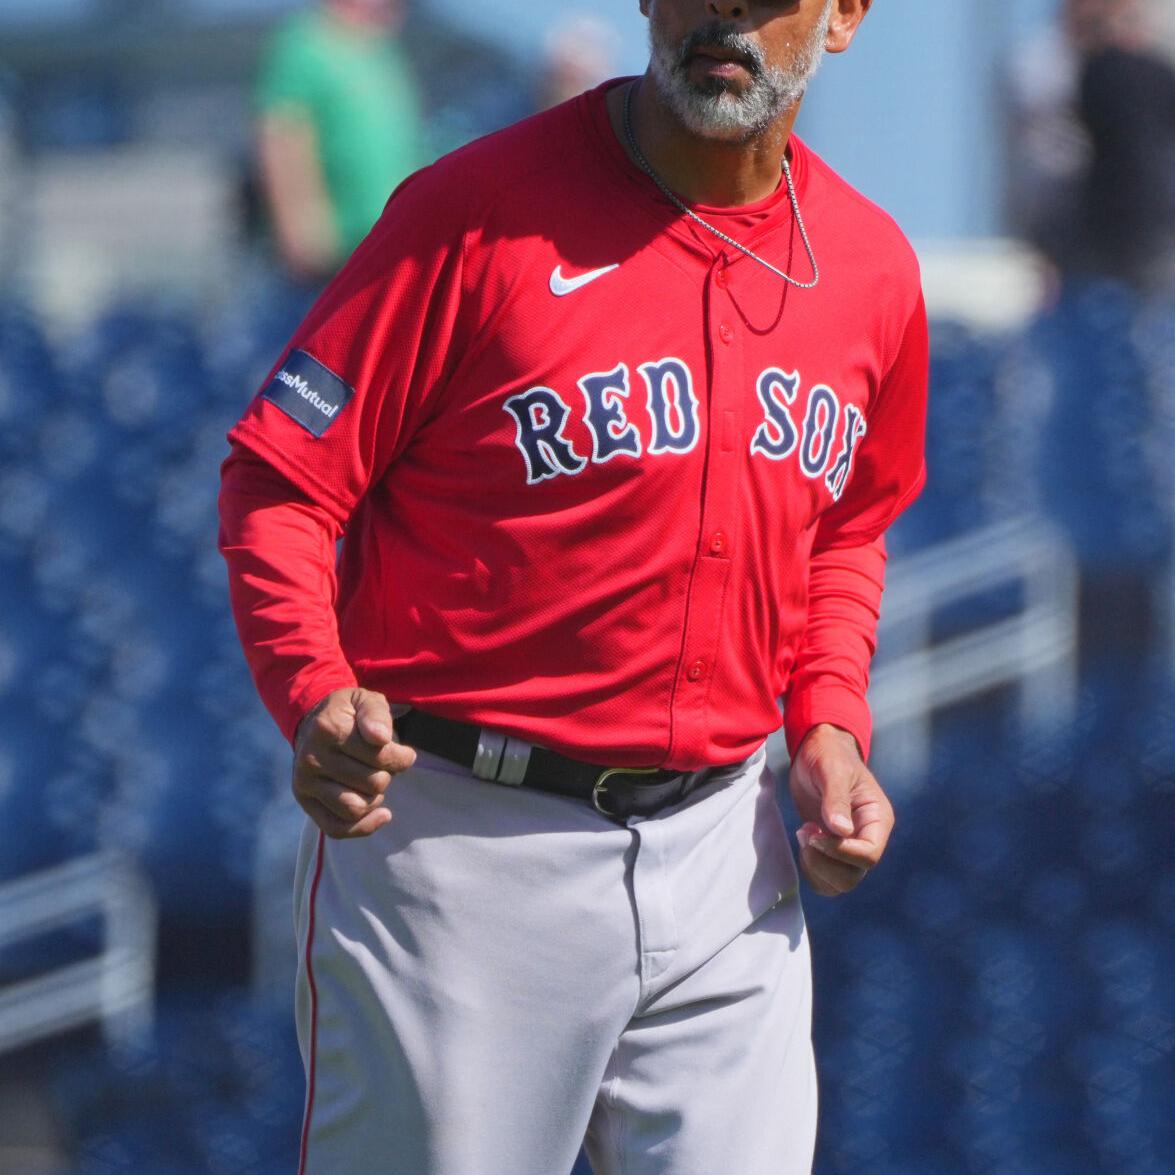 MLB notes: Ten takeaway from first two weeks of Red Sox spring training